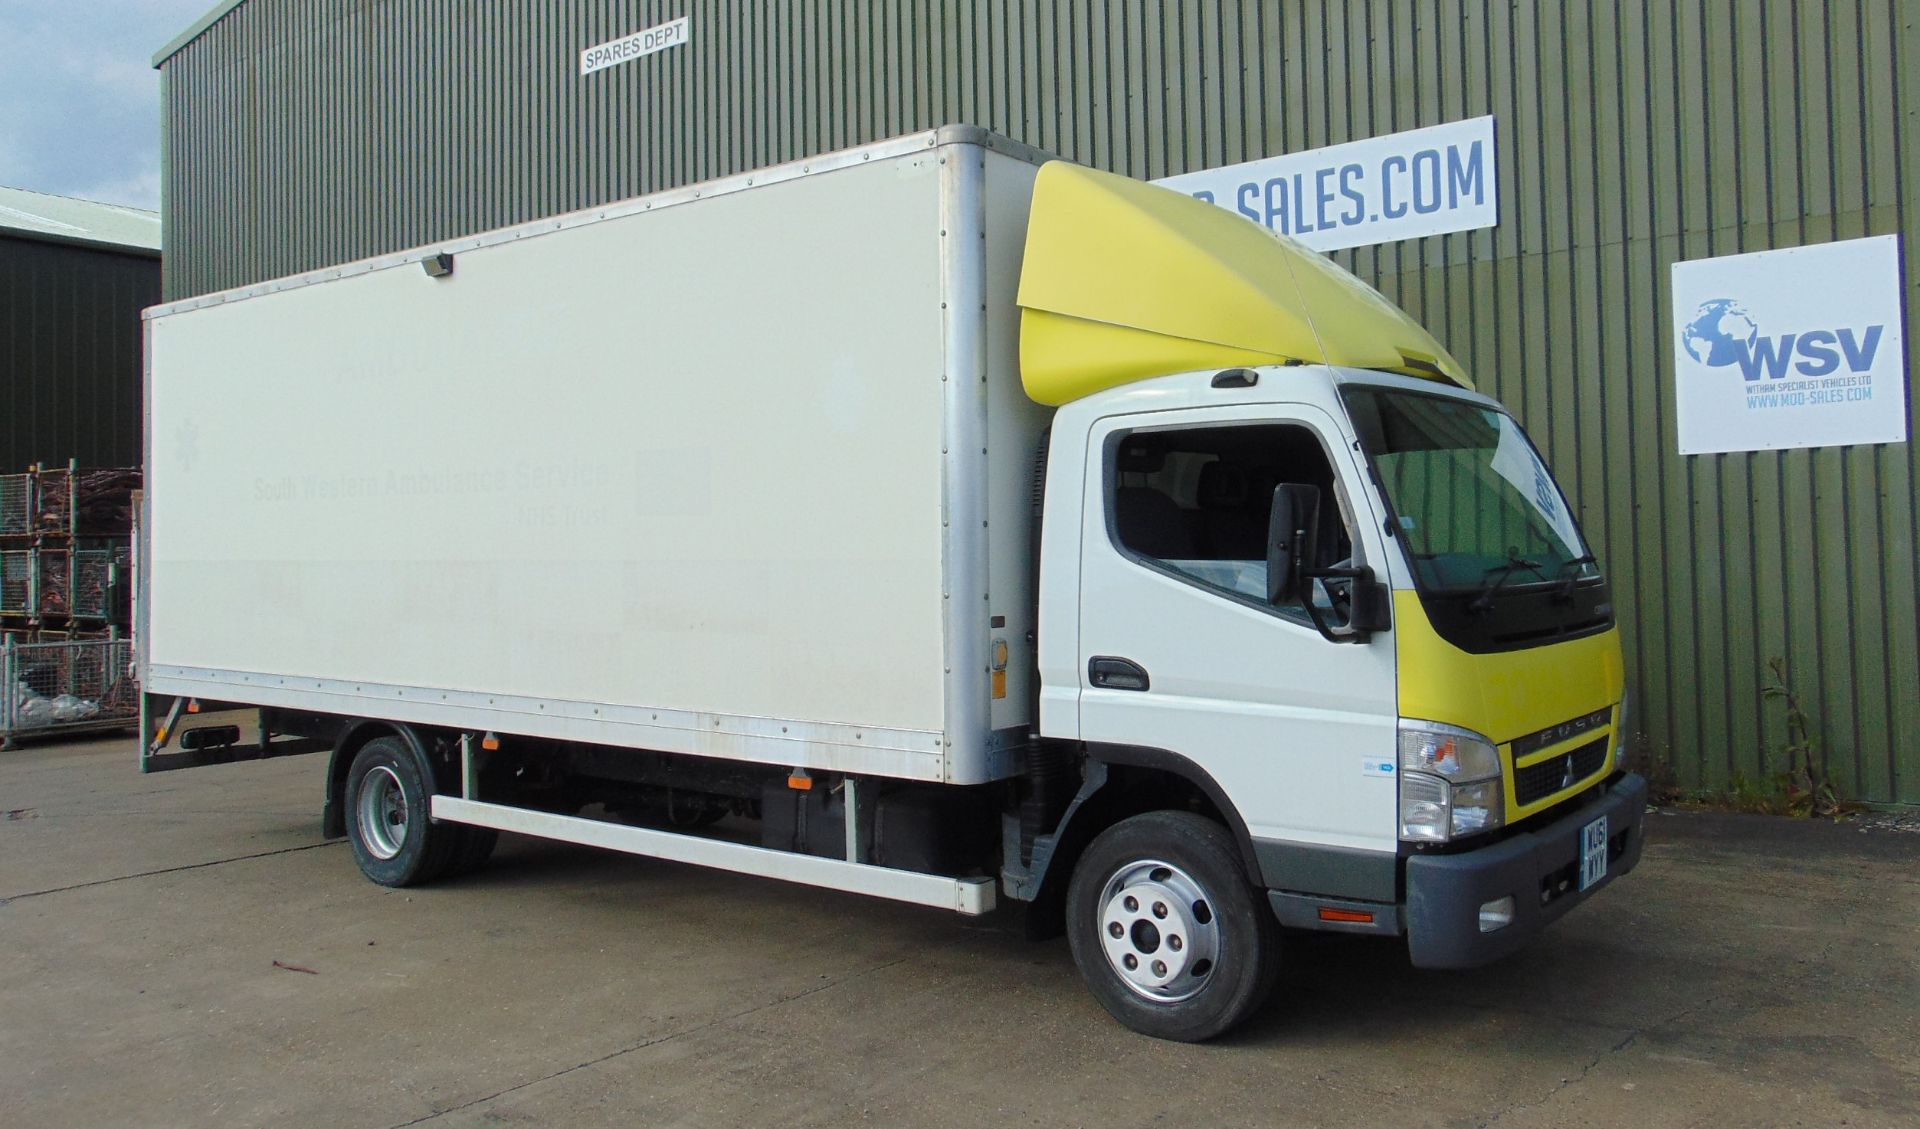 2011 Mitsubishi Fuso Canter Box lorry 7.5T - Only 5400 Miles! - Image 14 of 51